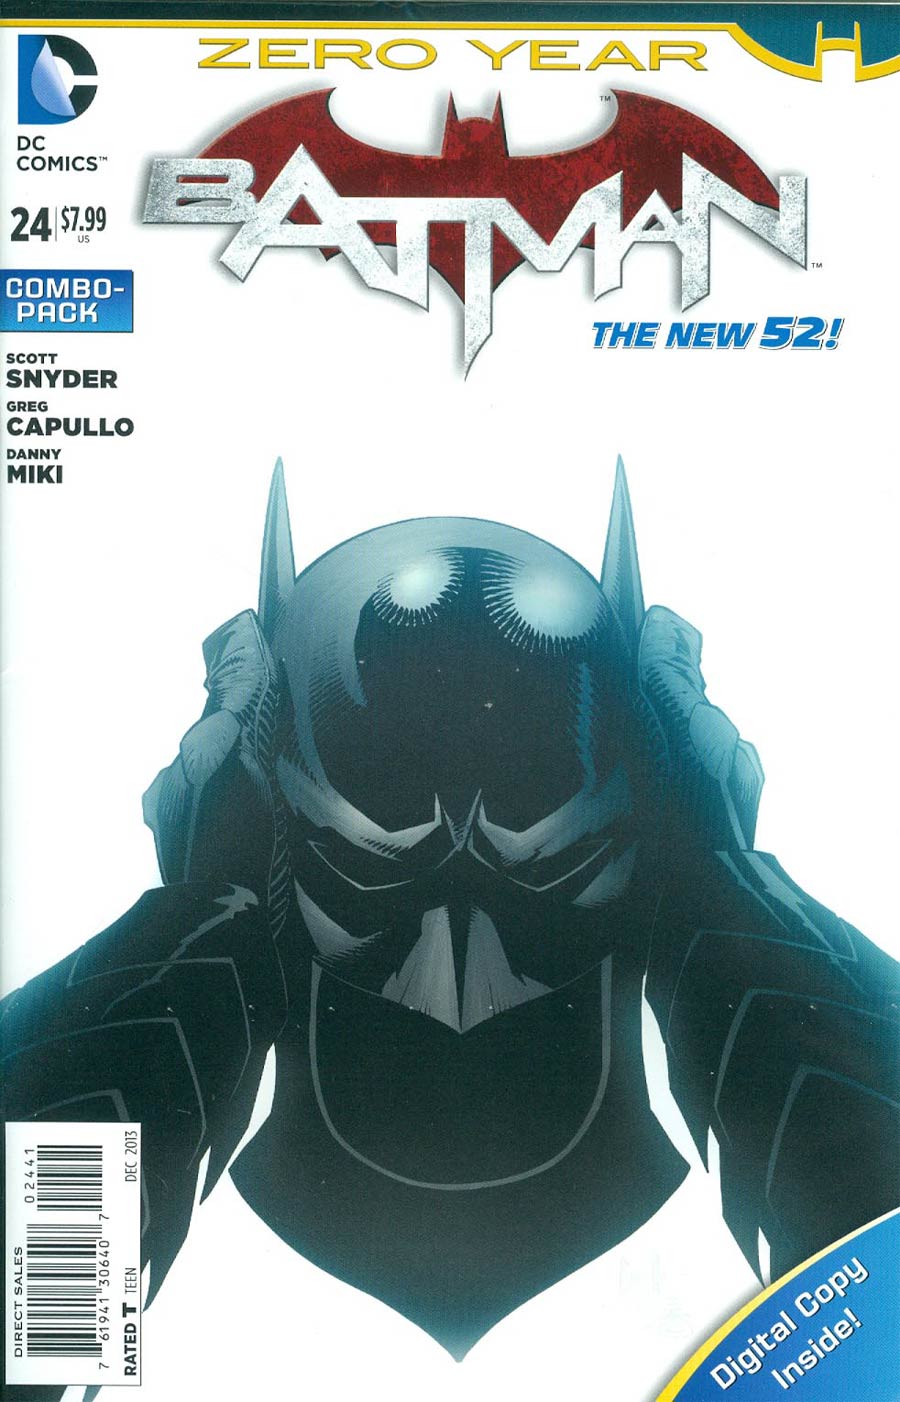 Batman Vol 2 #24 Cover C Combo Pack Without Polybag (Batman Zero Year Tie-In)